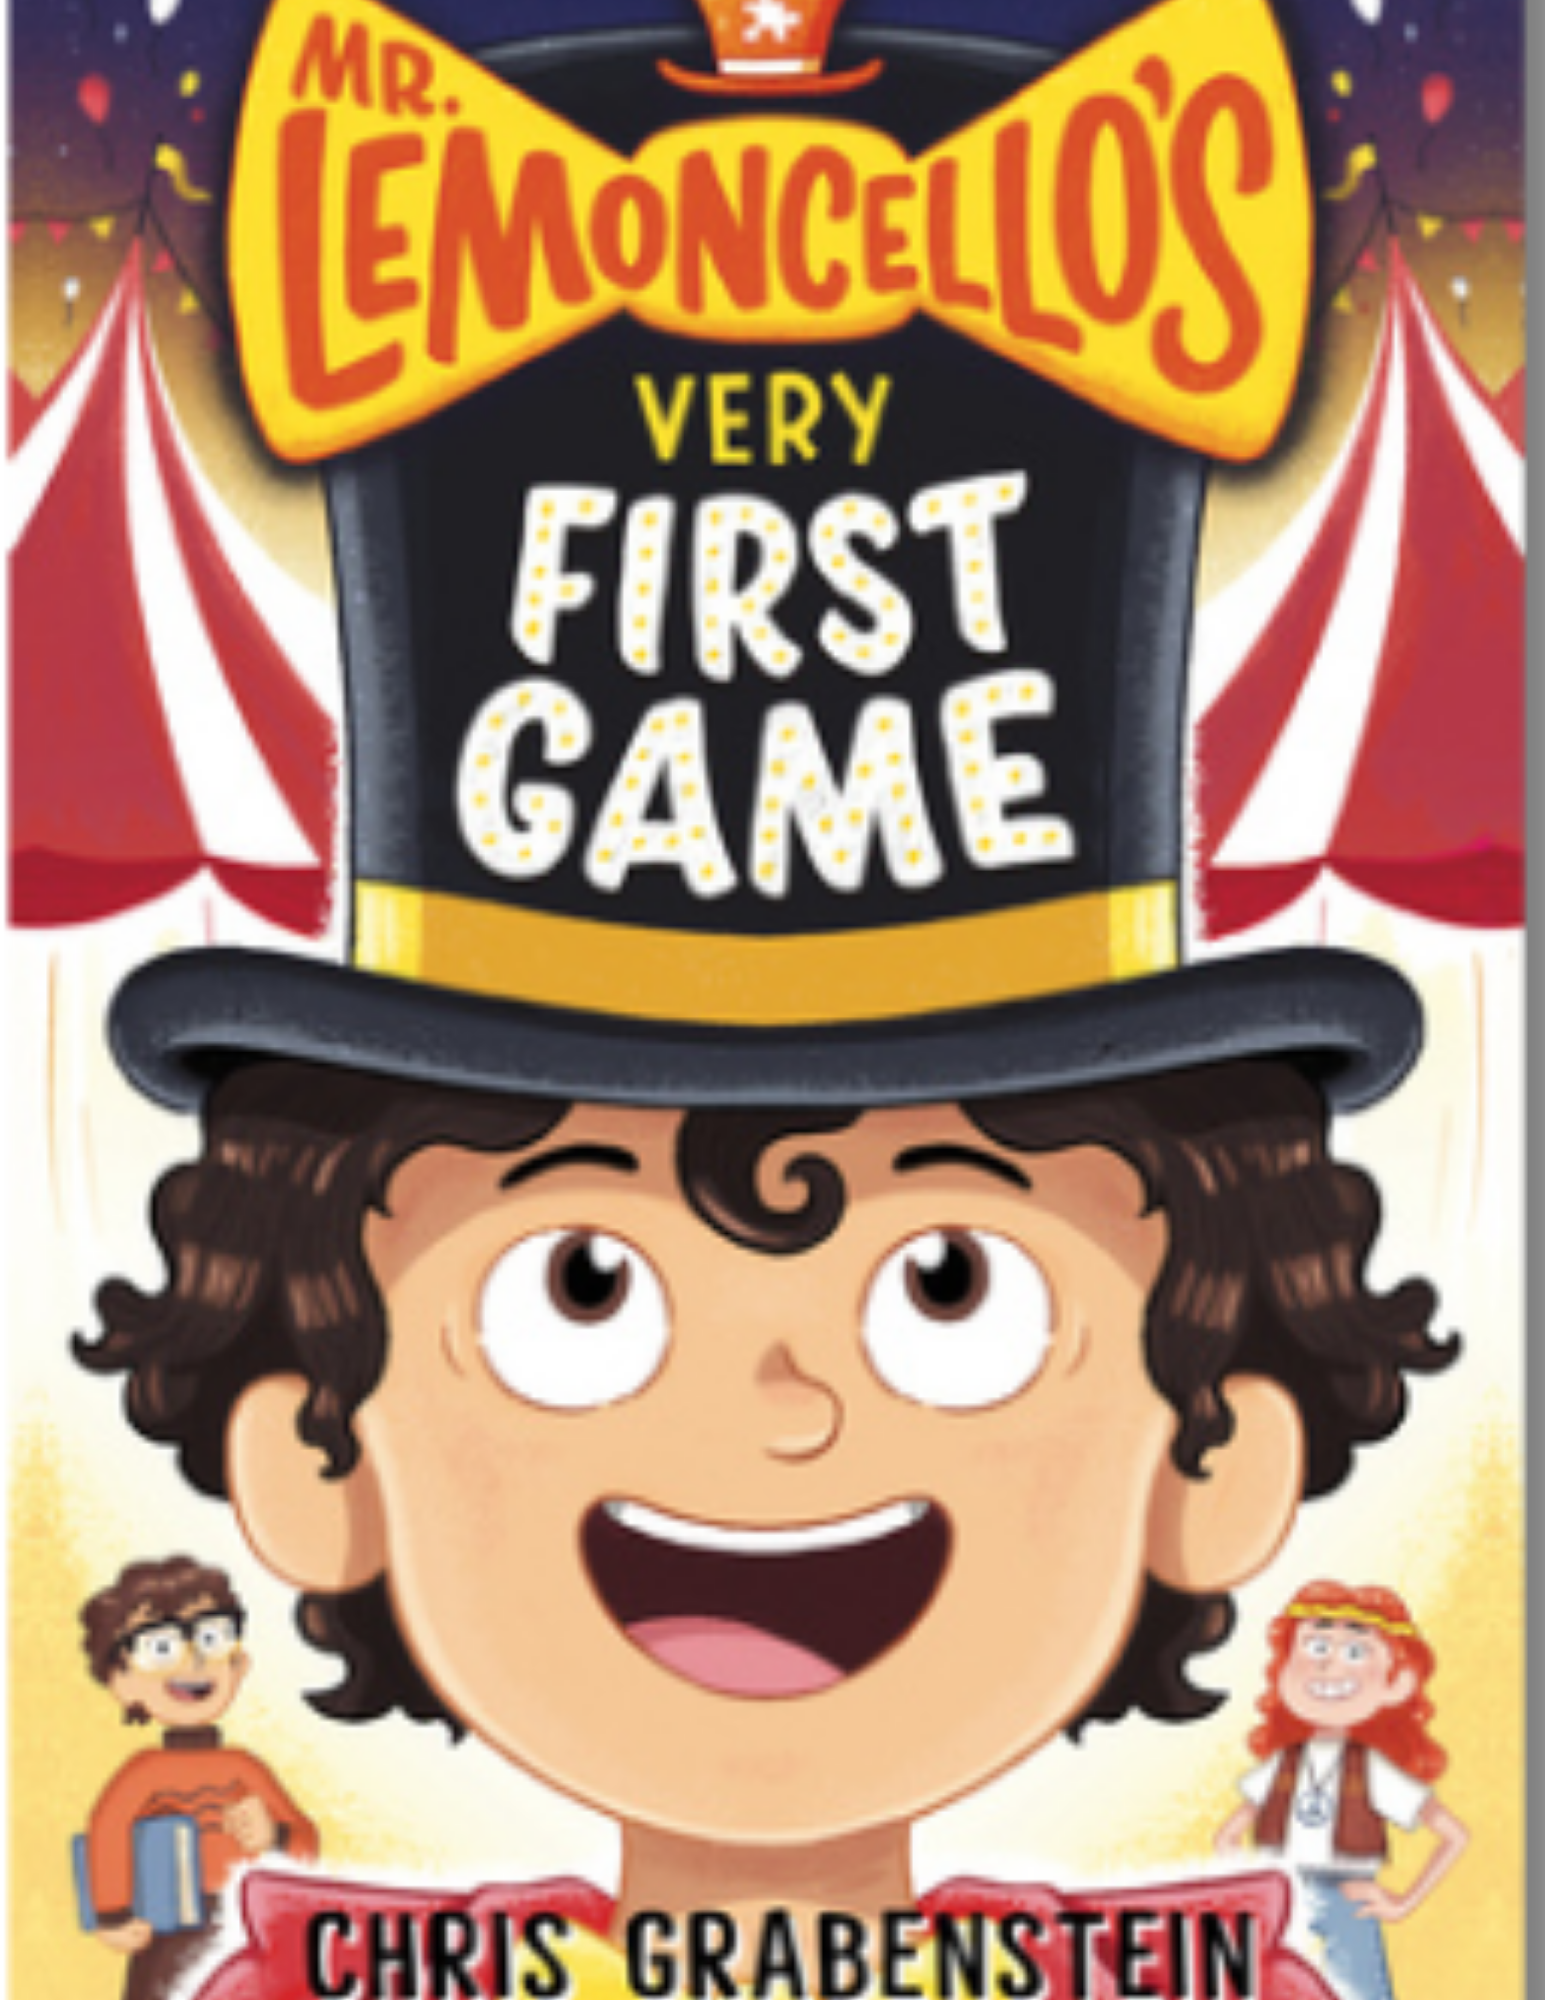 Mr Lemoncellos Very First Game by Chris Grabenstein